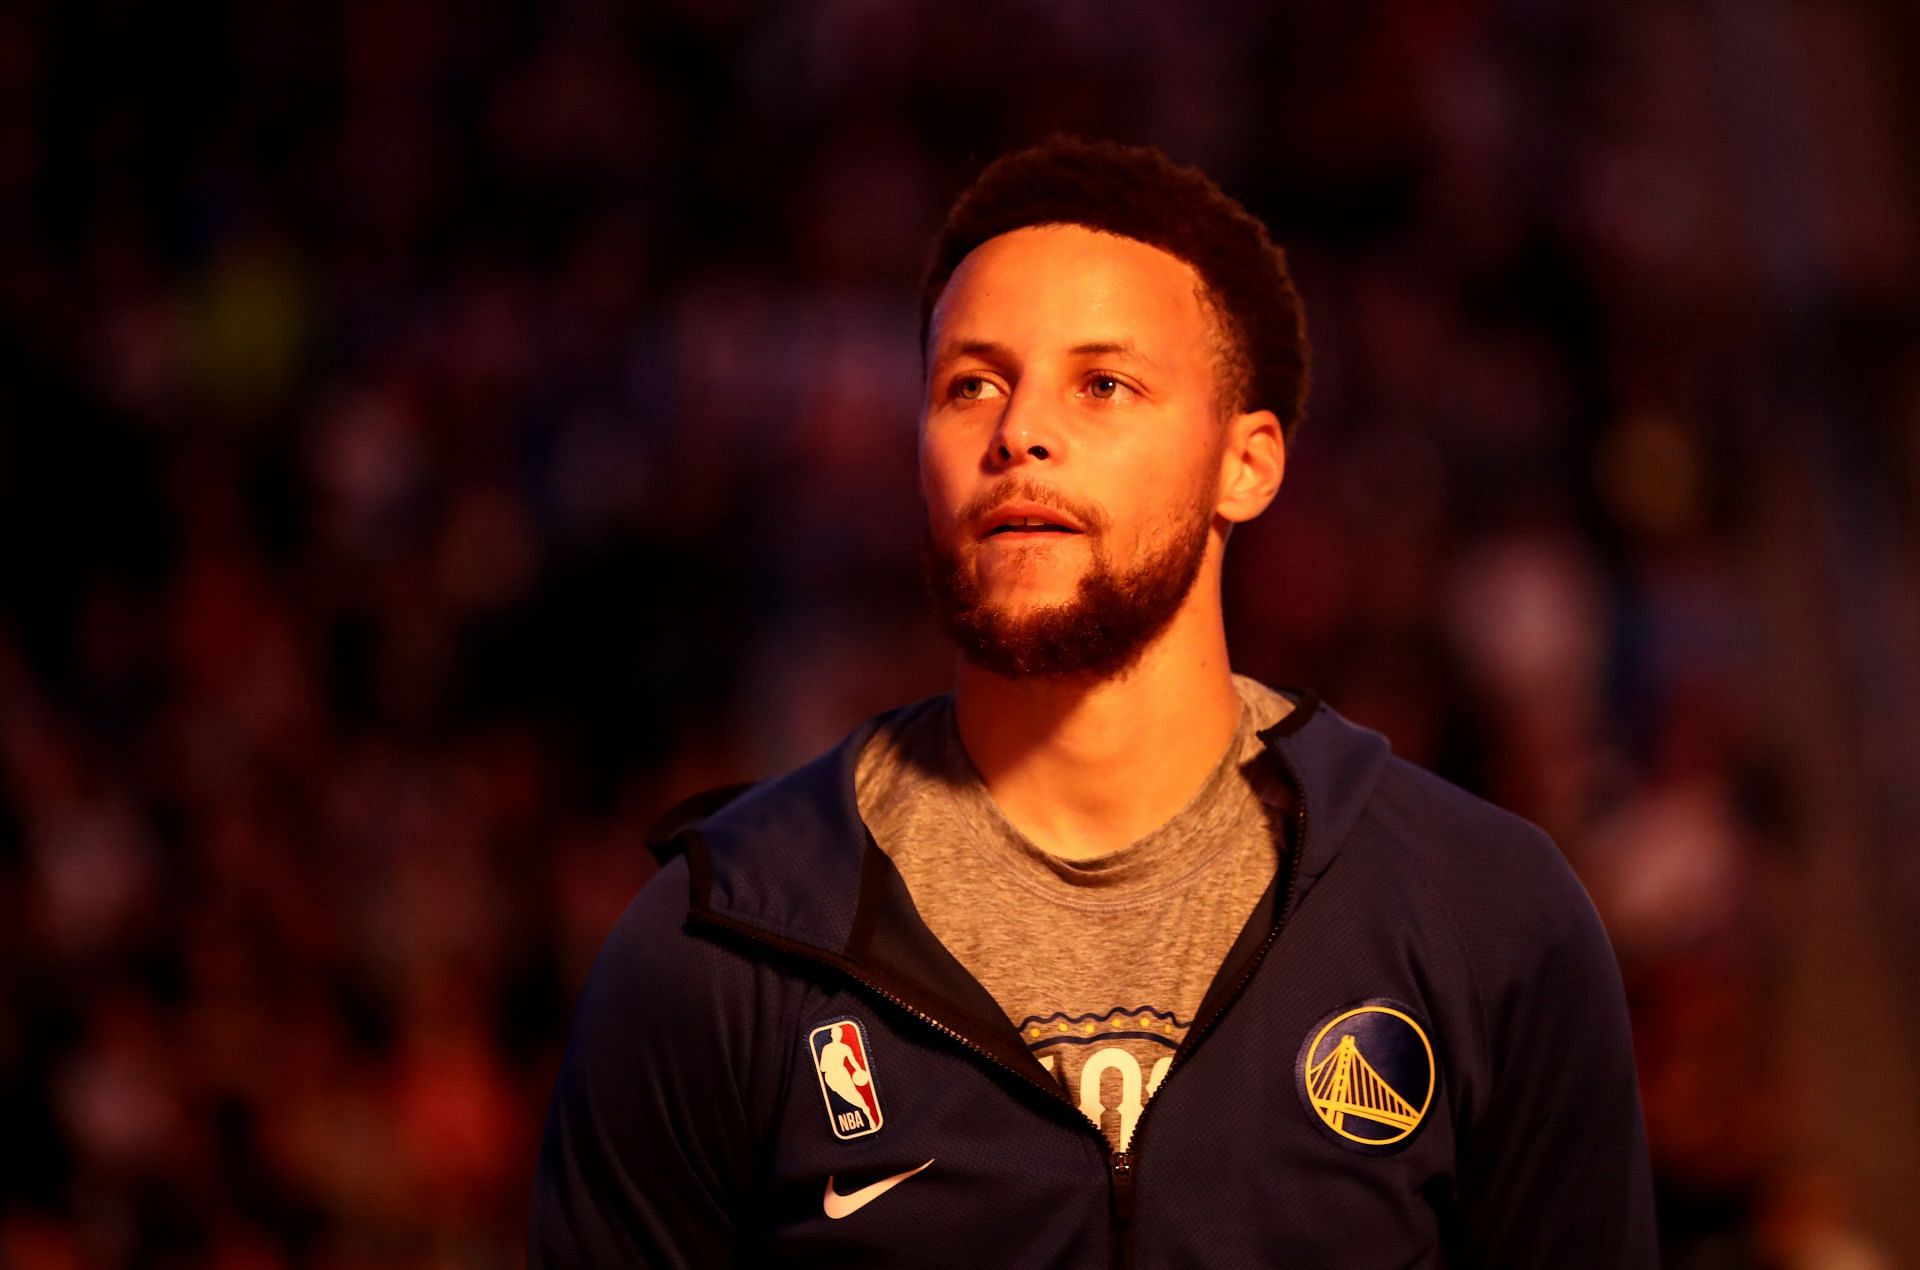 Stephen Curry of the Golden State Warriors in the 2019-20 NBA season